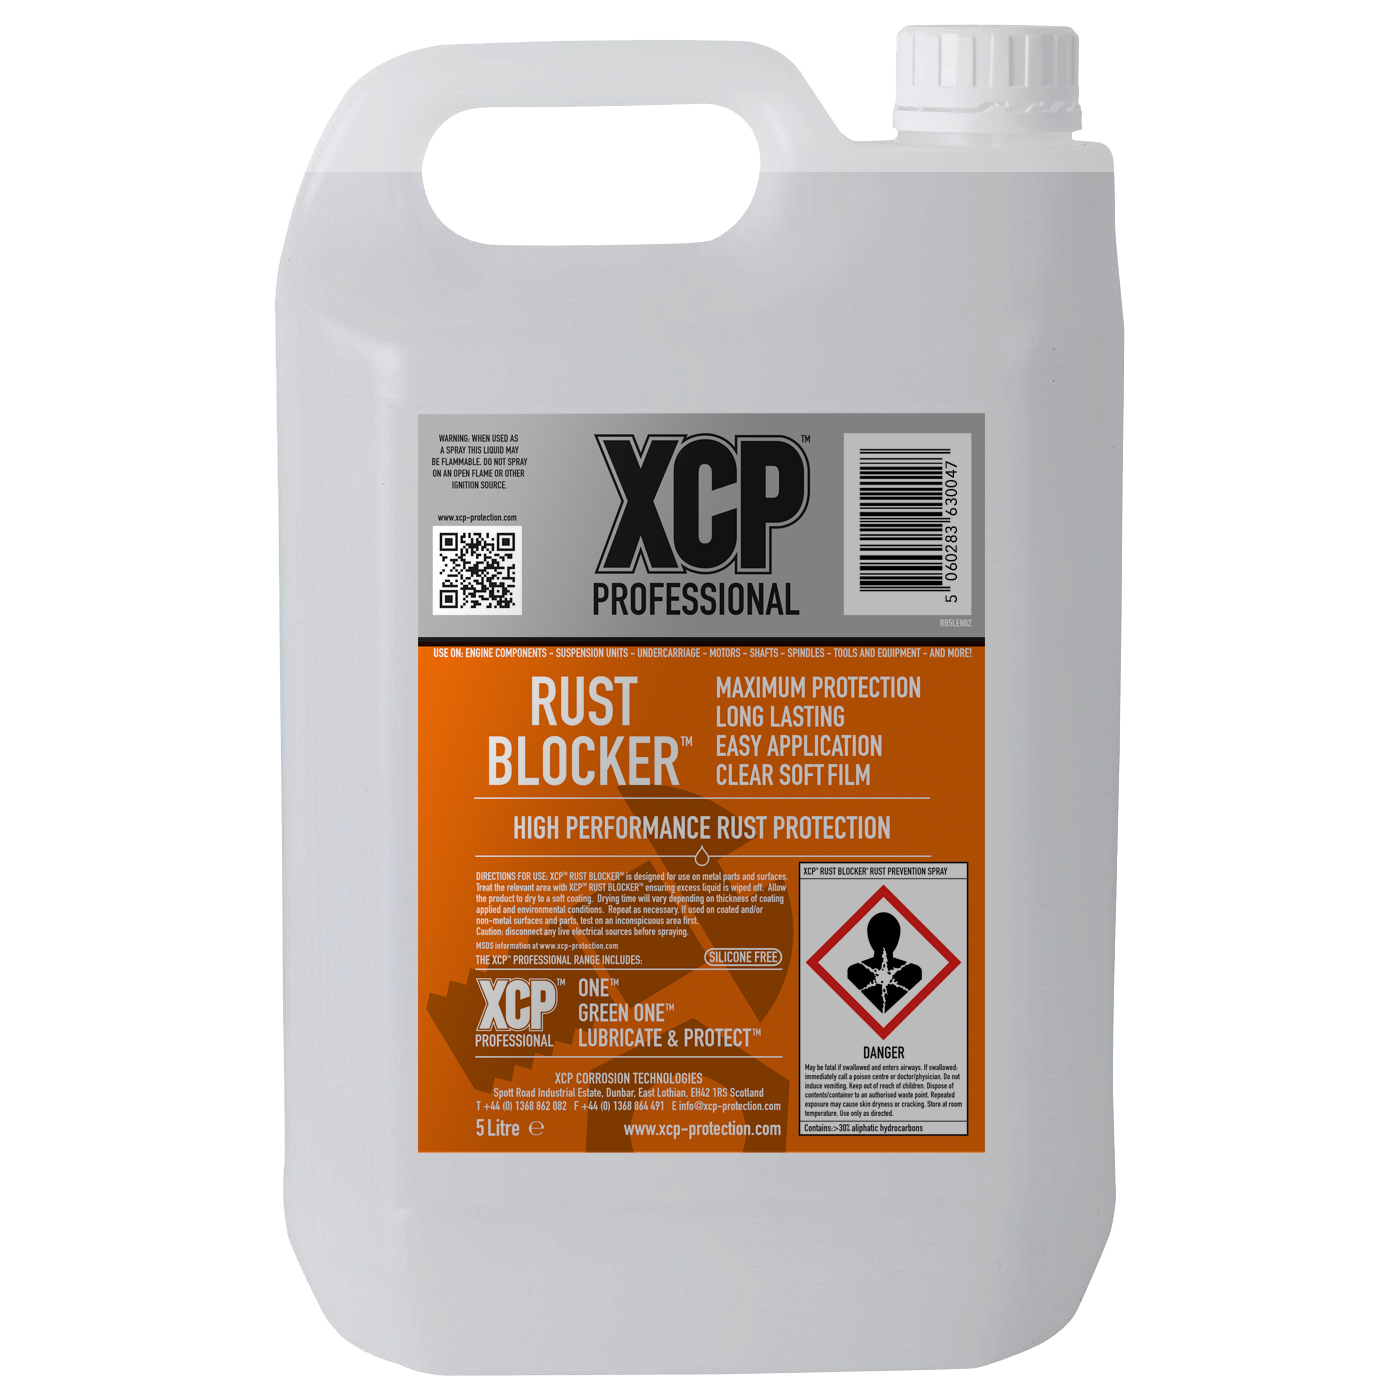 XCP Professional 5 liter canister